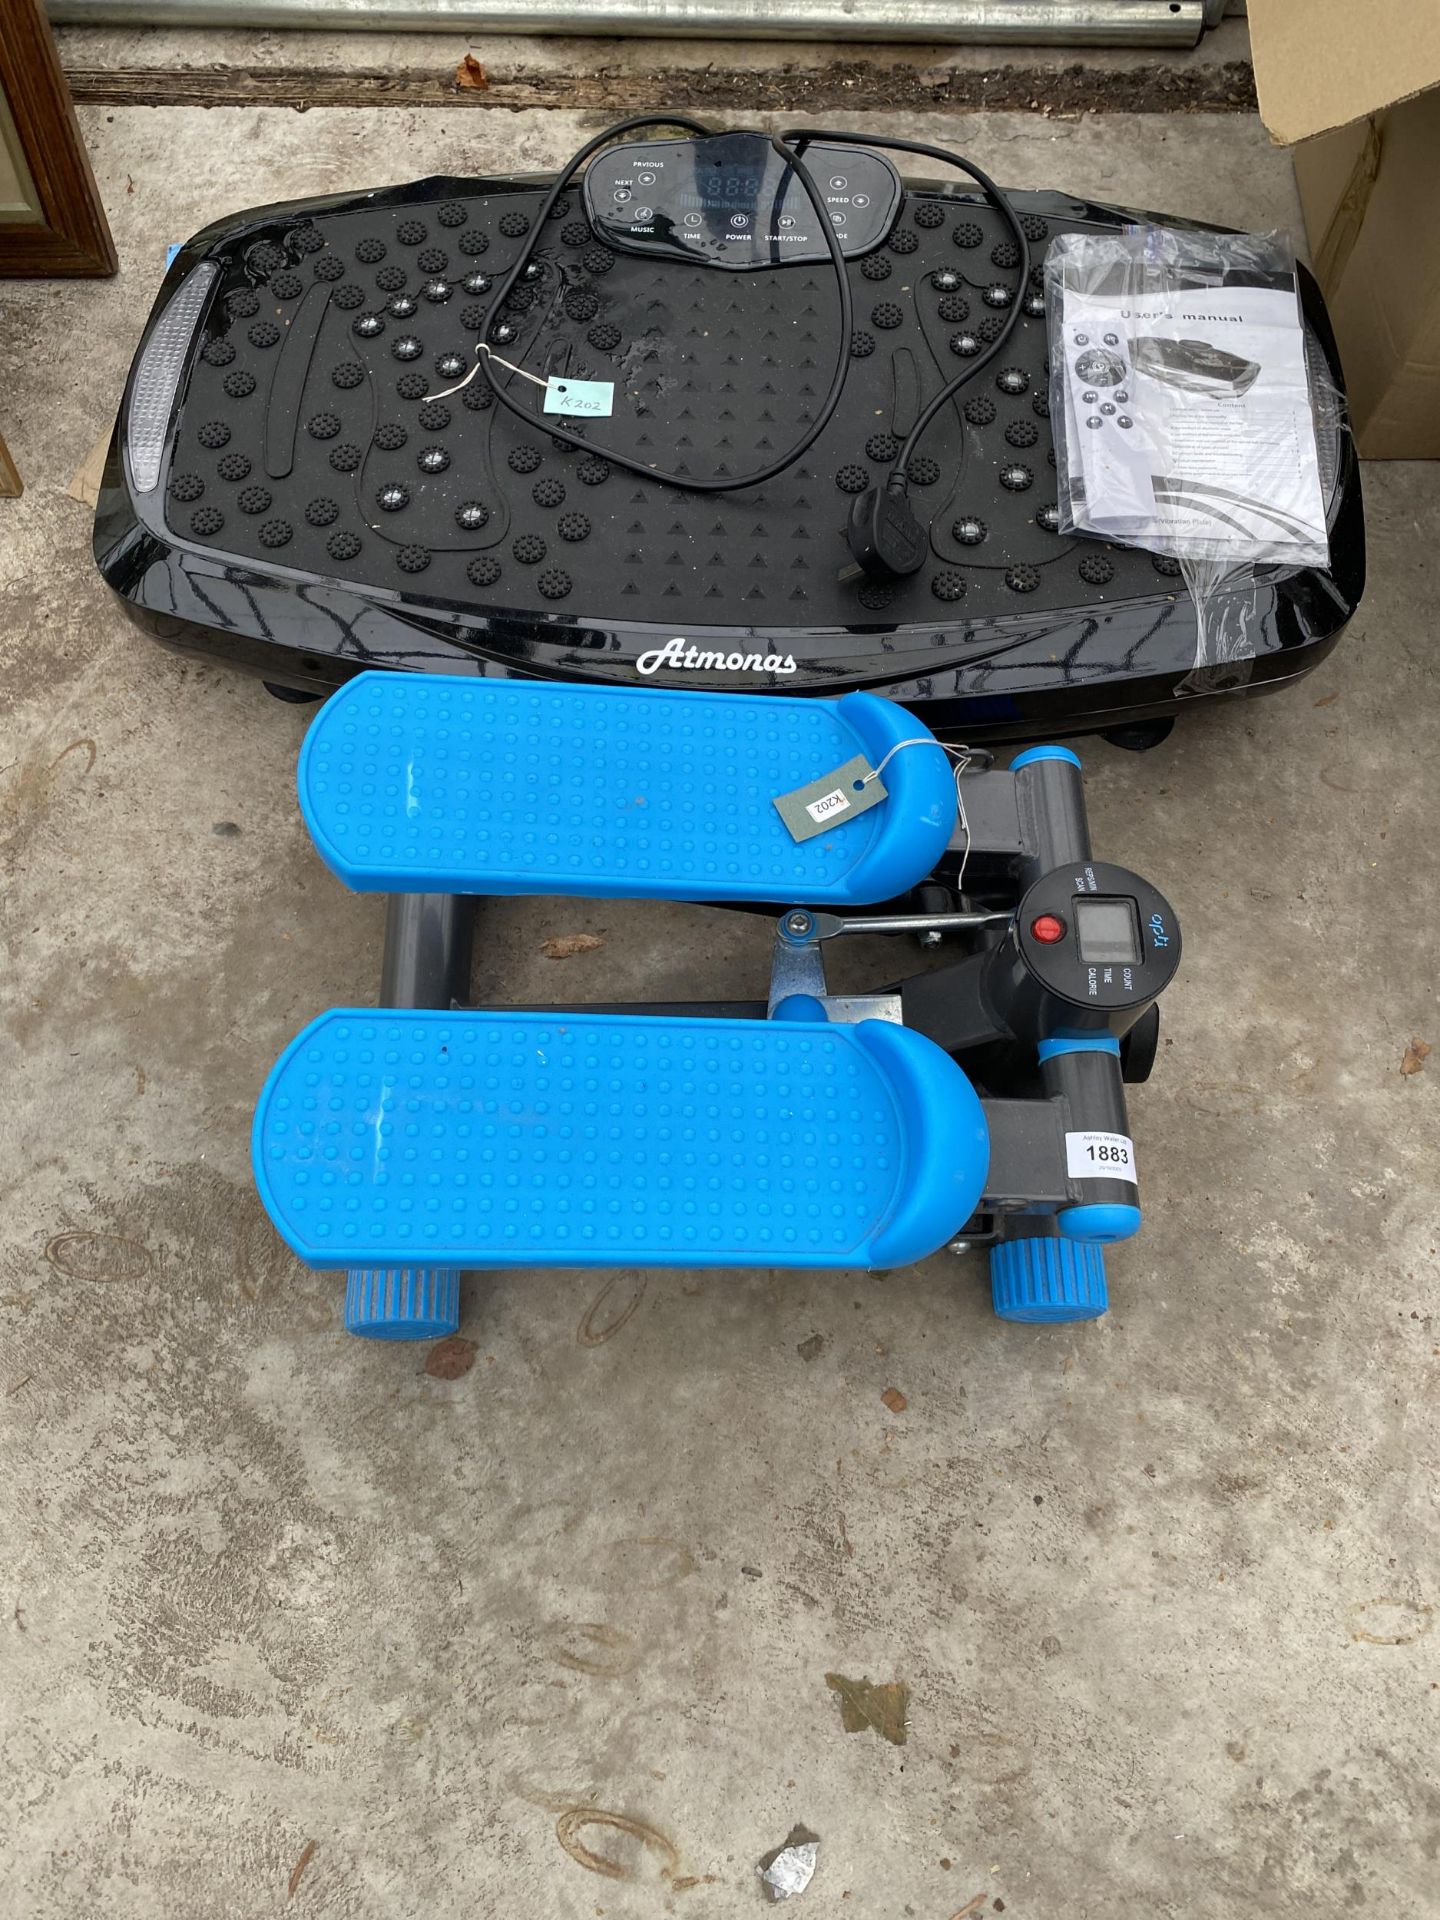 A LARGE VIBRATING PLATE EXERCISE MACHINE WITH BUILT IN BLUETOOTH, INSTRUCTIONS, AND REMOTE